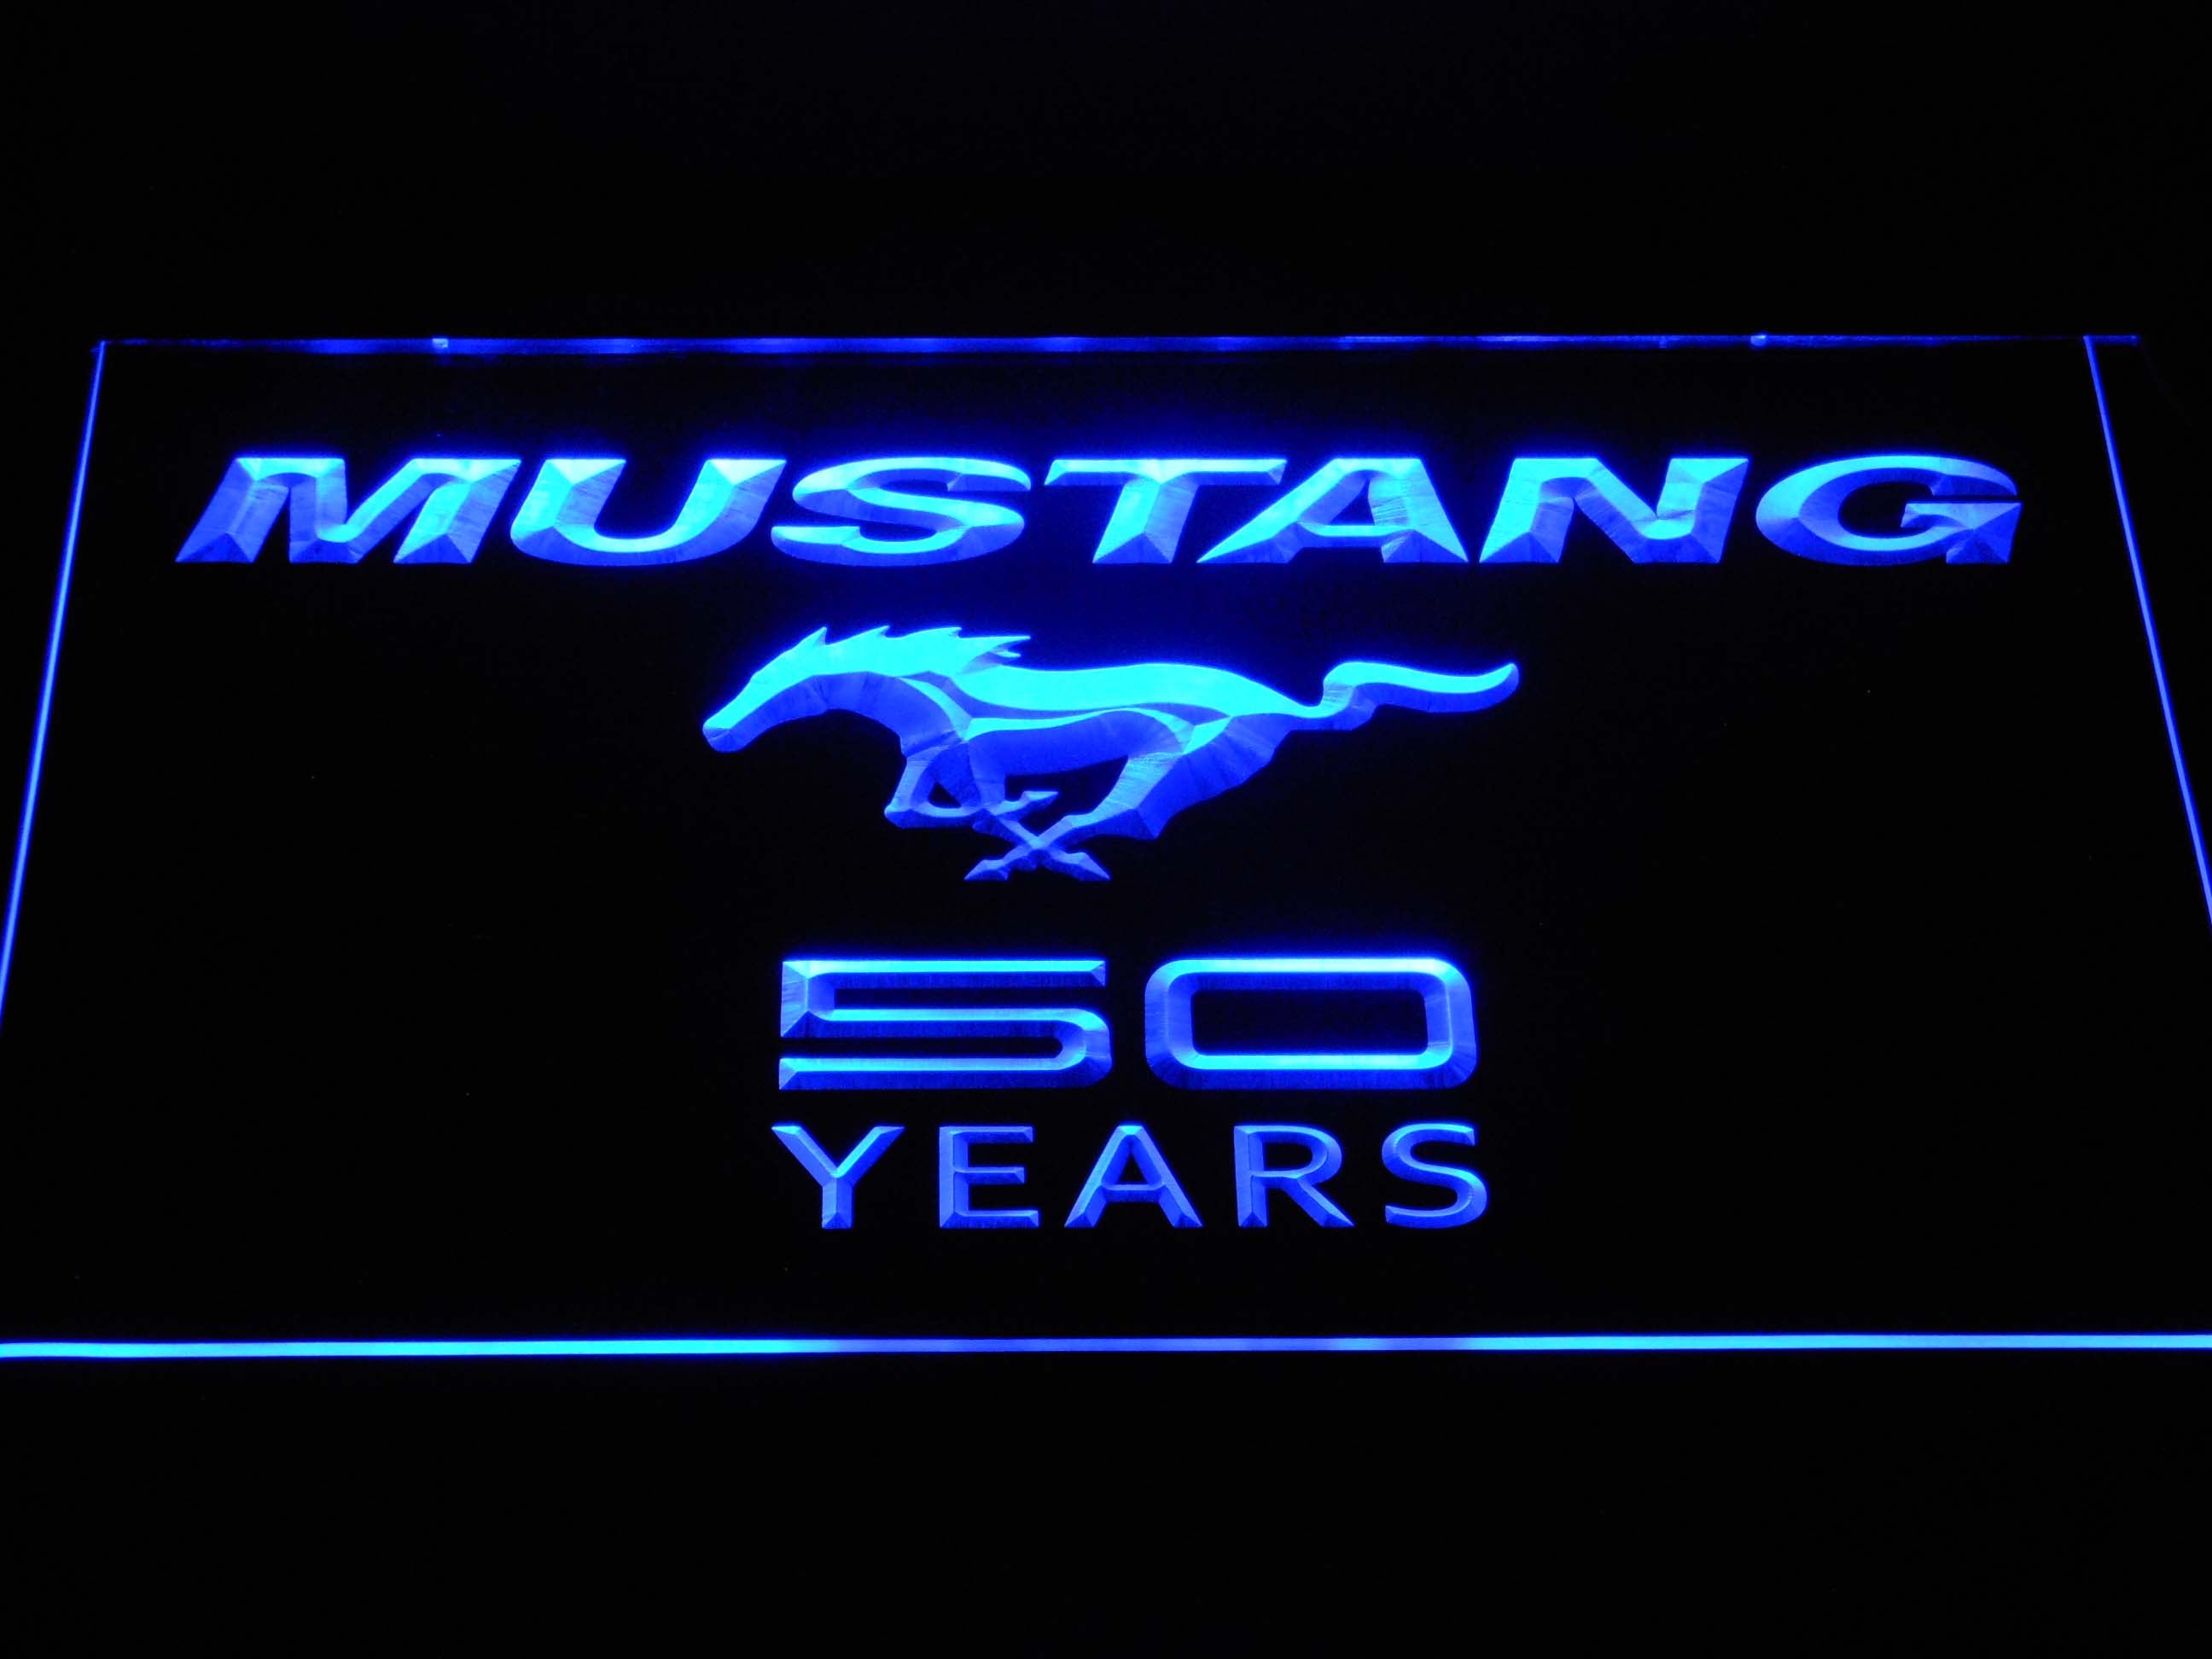 Ford Mustang 50 Years Wordmark Neon Light LED Sign